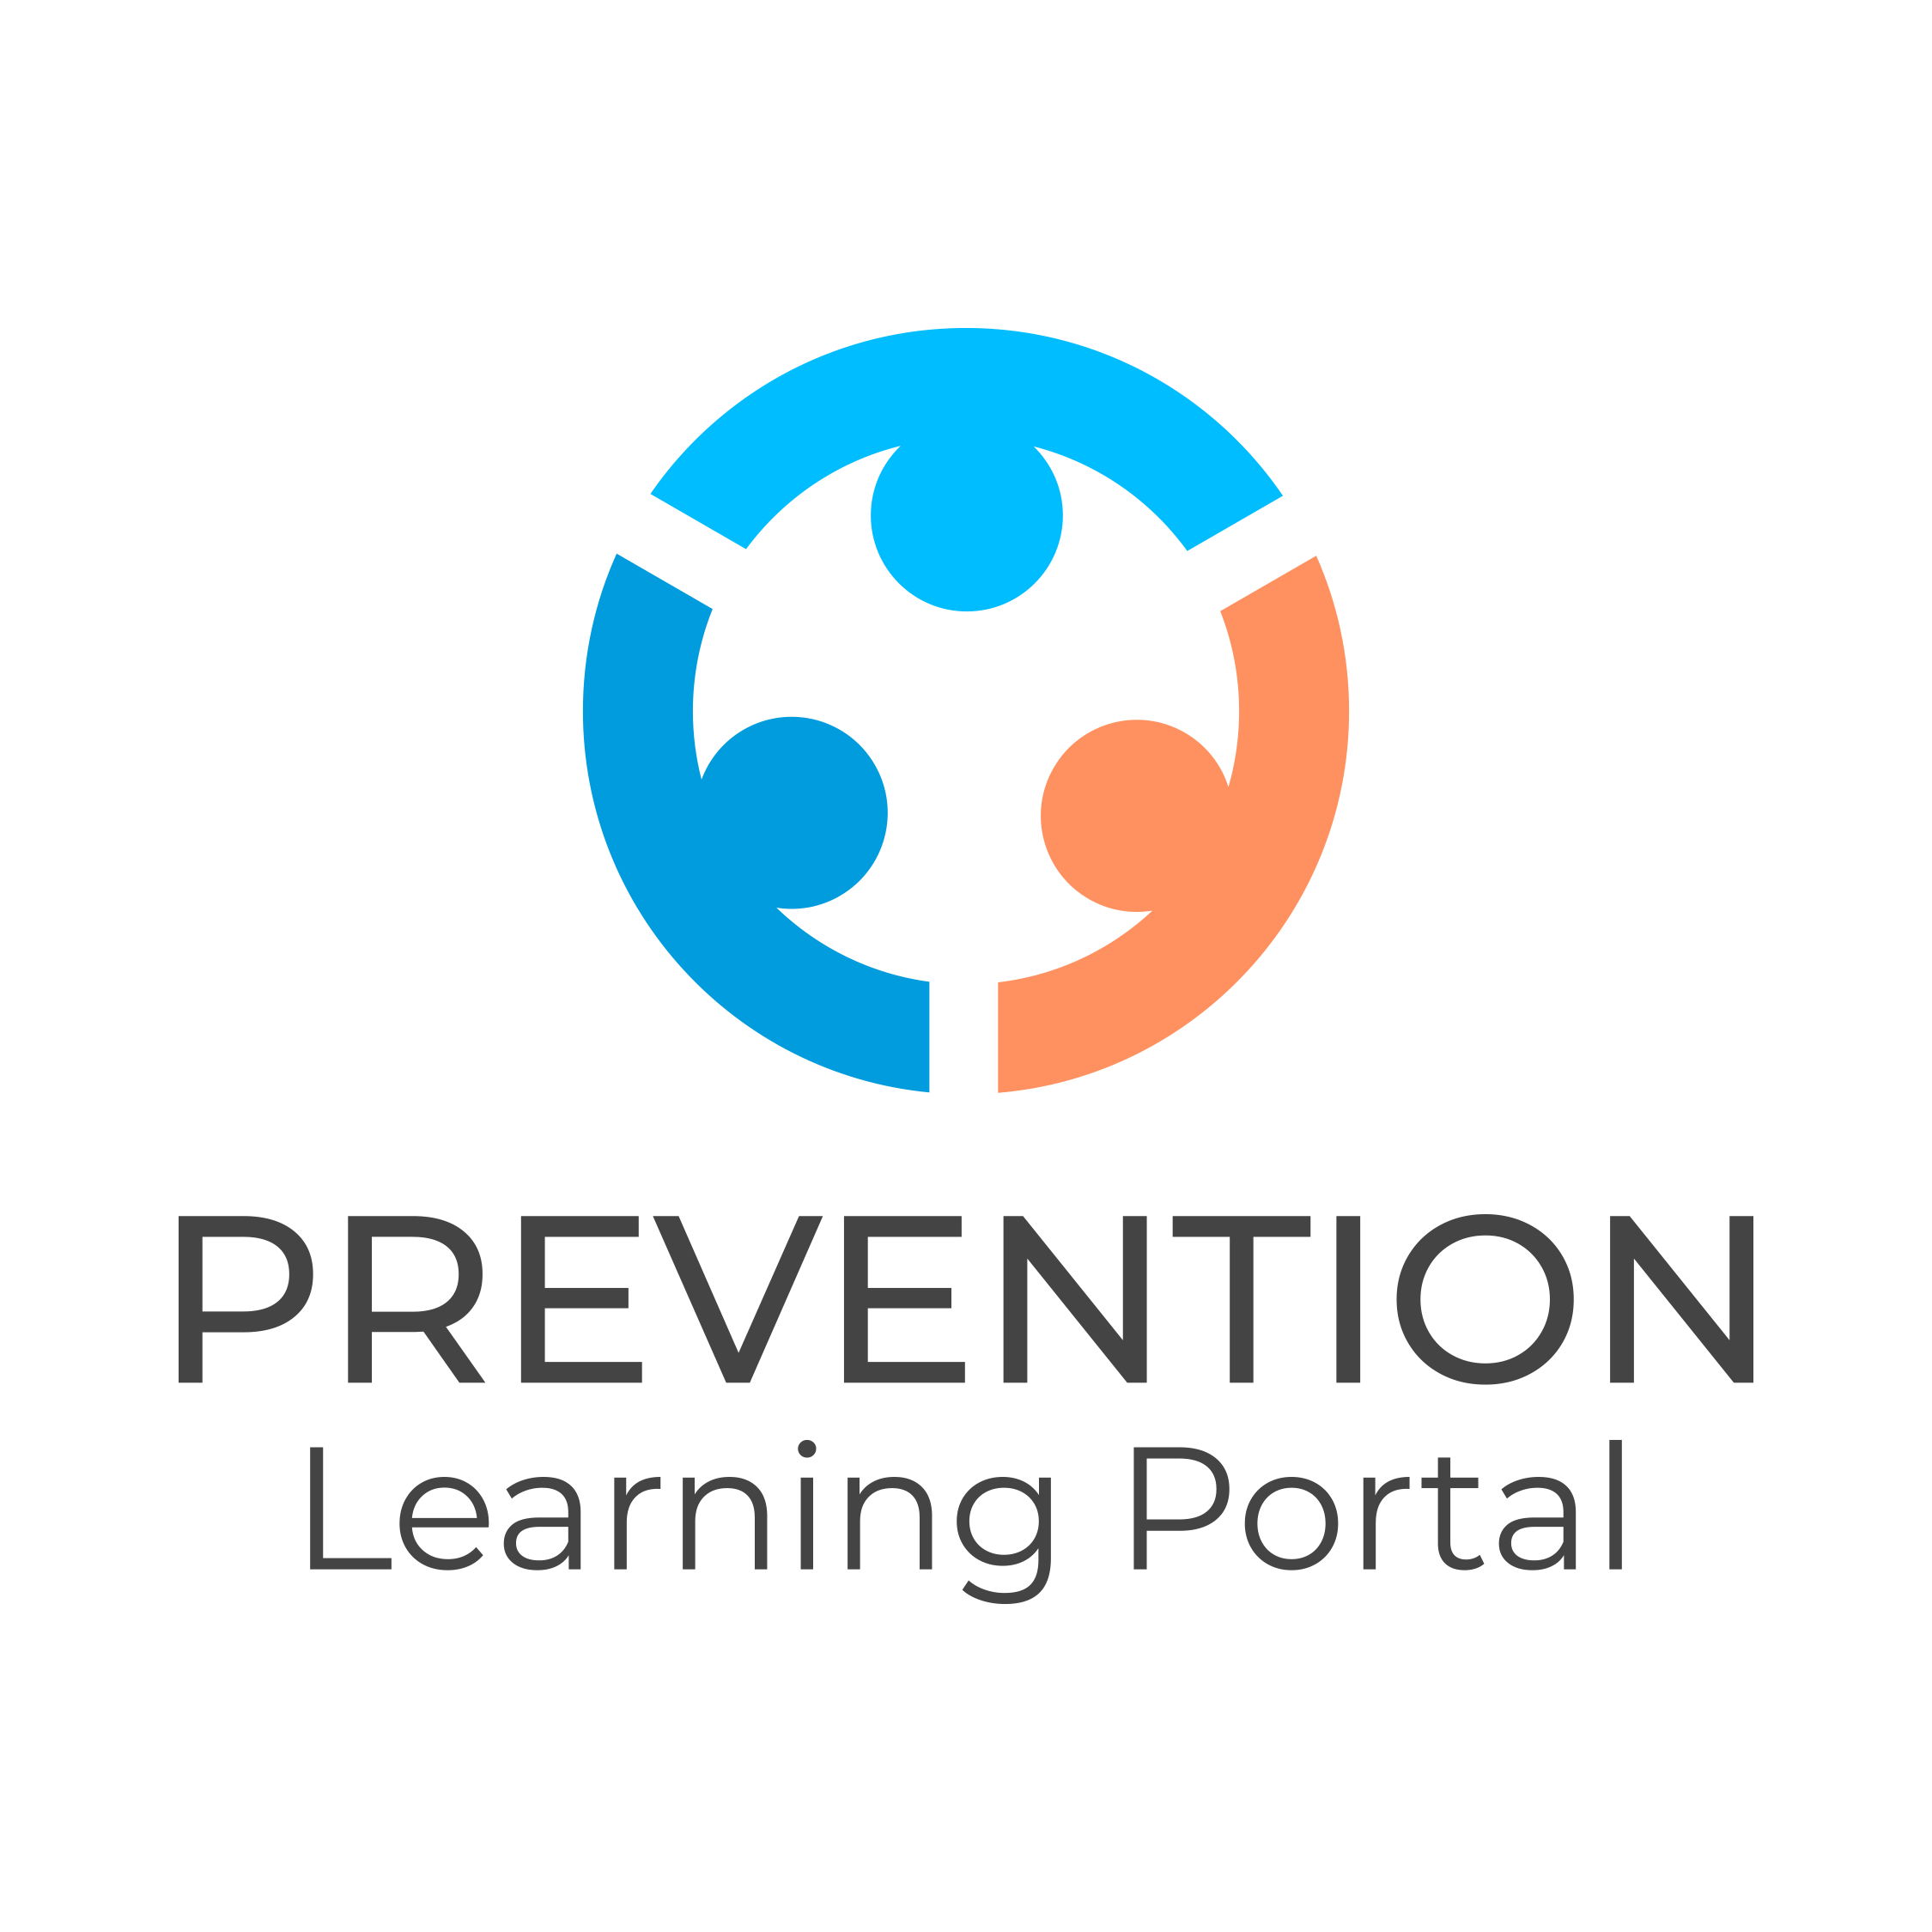 Prevention Learning Portal logo and link to site